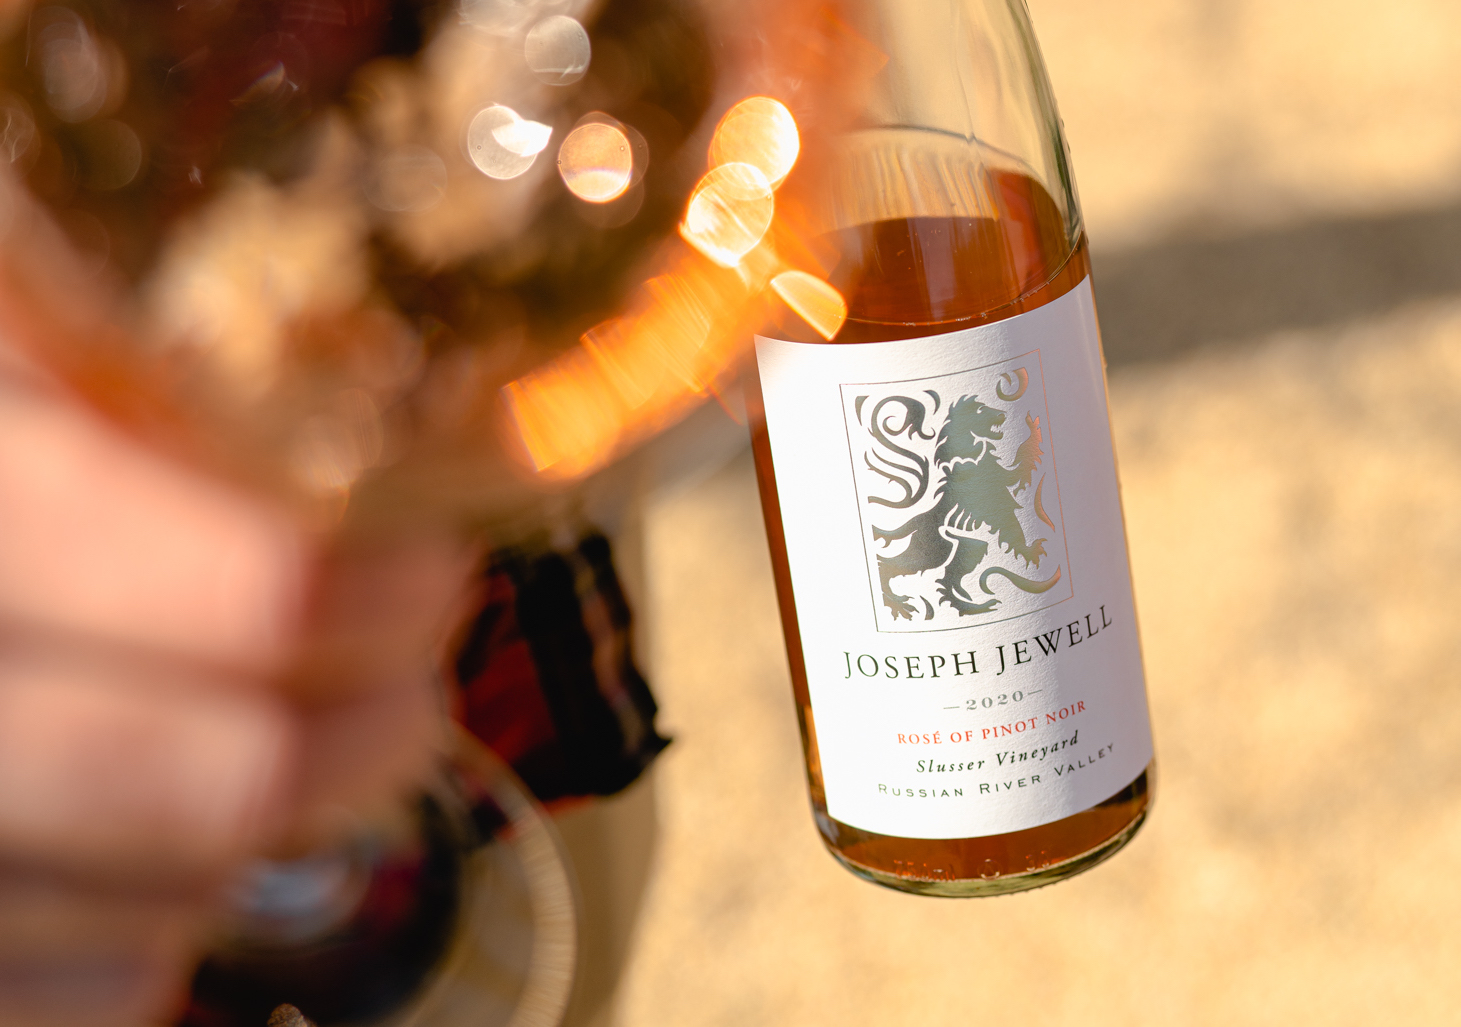 Wine Bottle and Wine Glass of Joseph Jewell Wines 2020 Rosé of Pinot Noir Russian River Valley